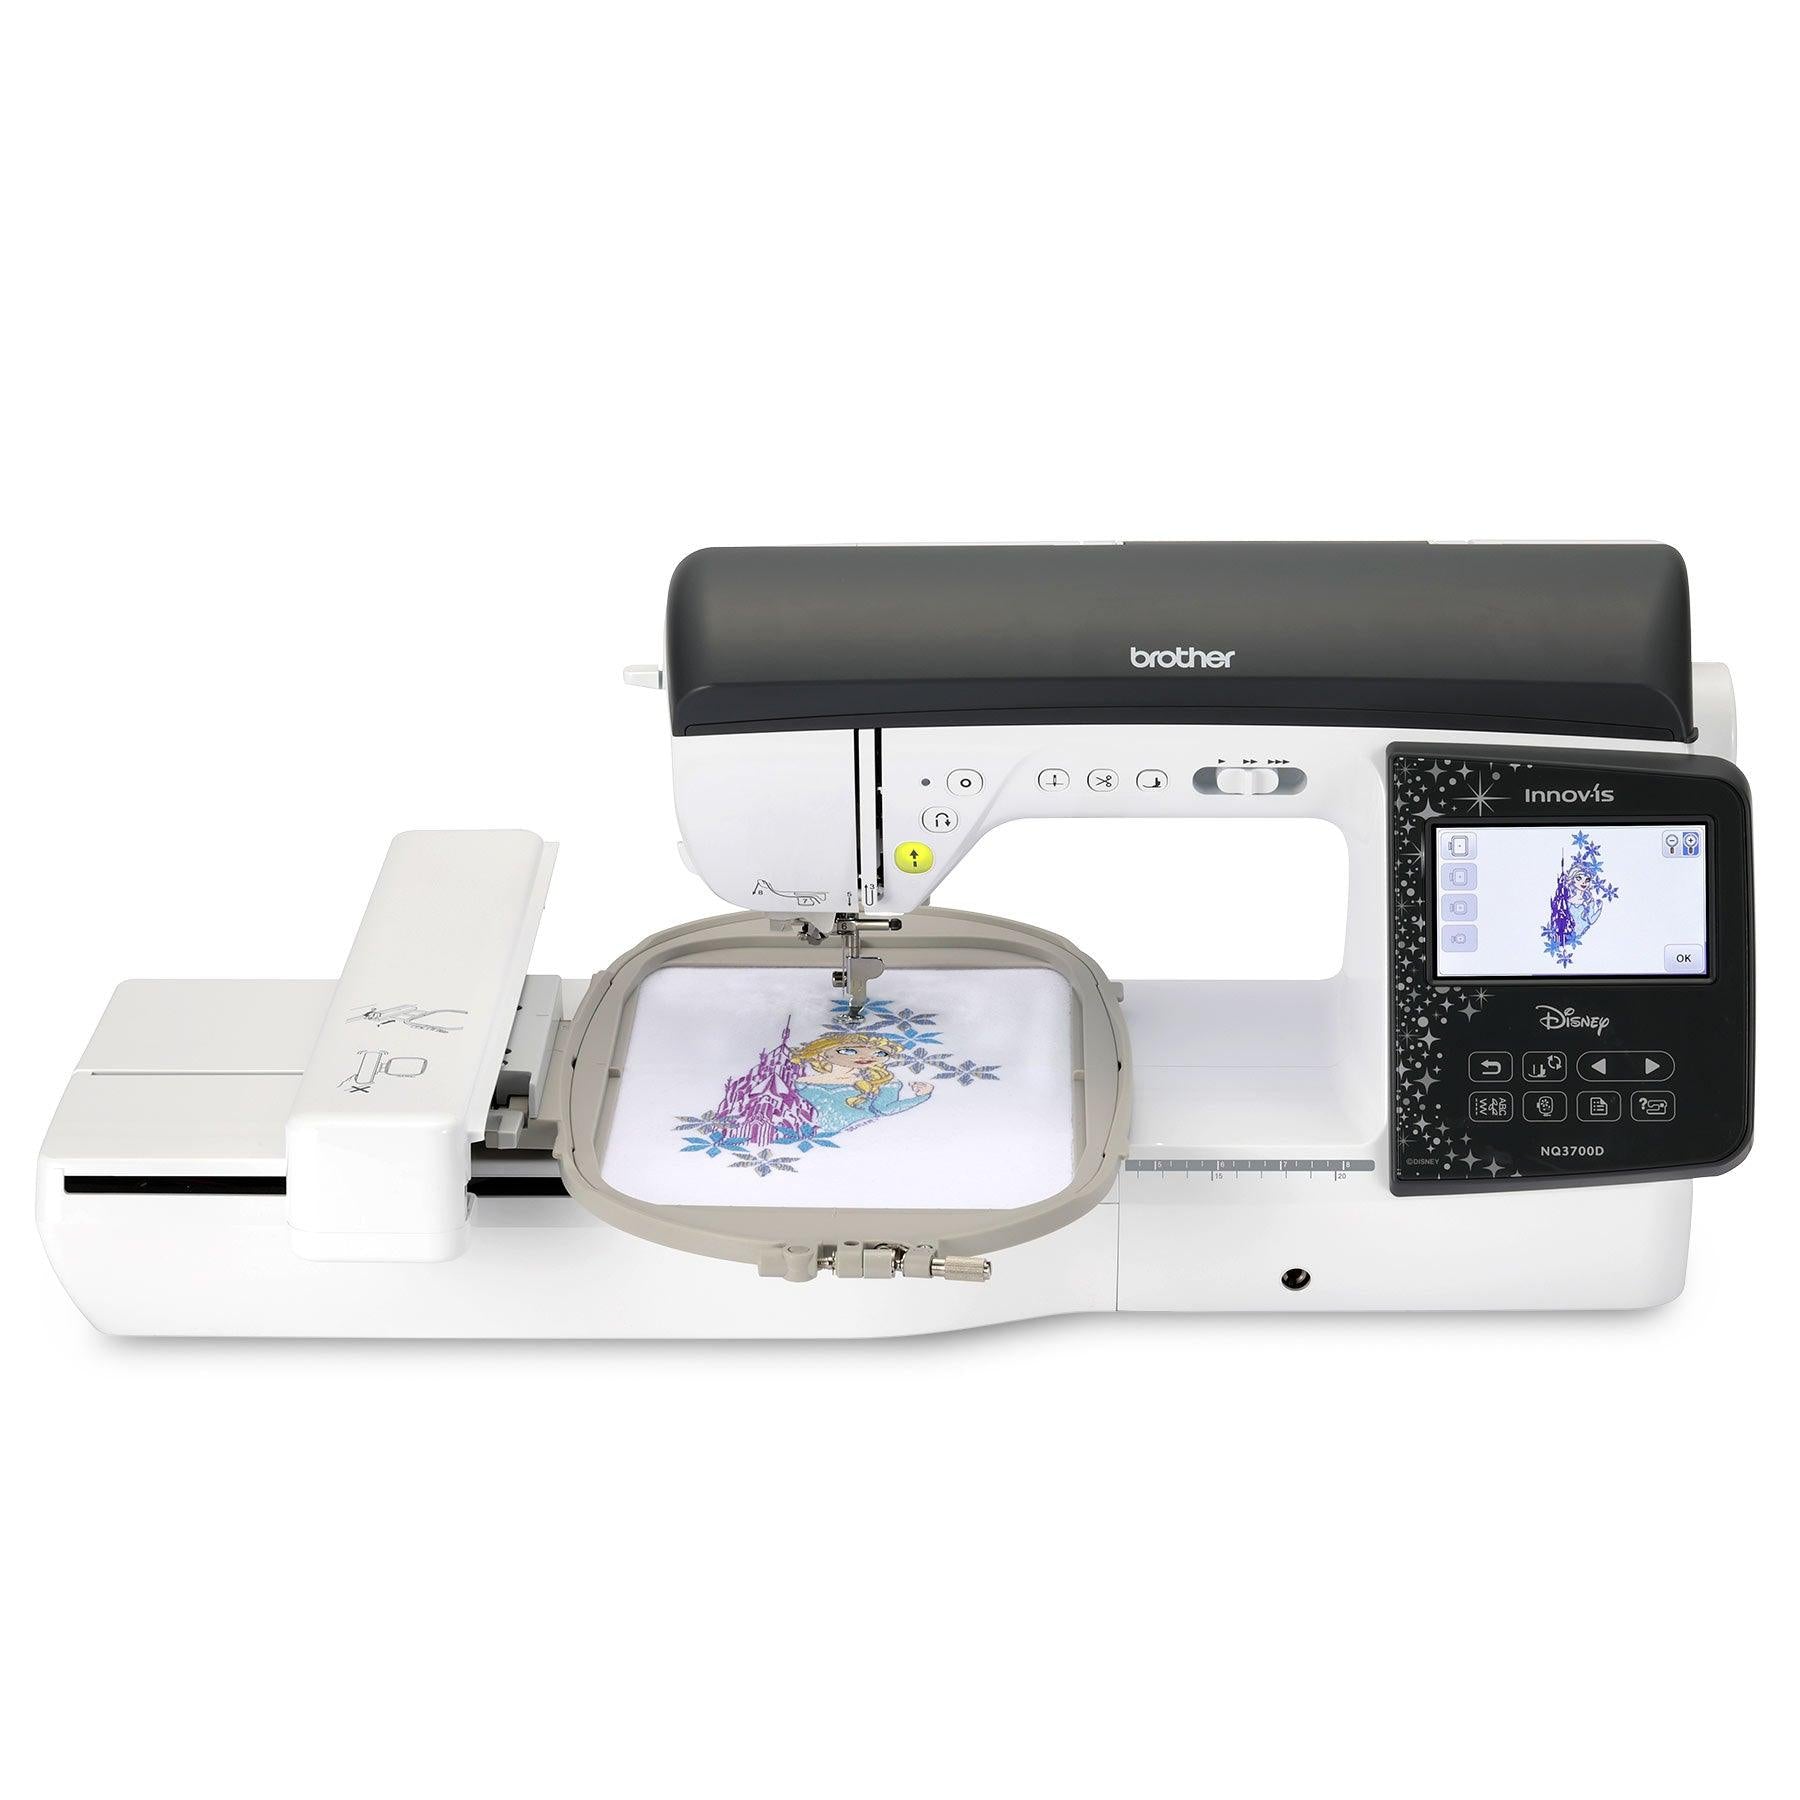 Brother NQ3700D The Fashionista 2 - Kawartha Quilting and Sewing LTD.